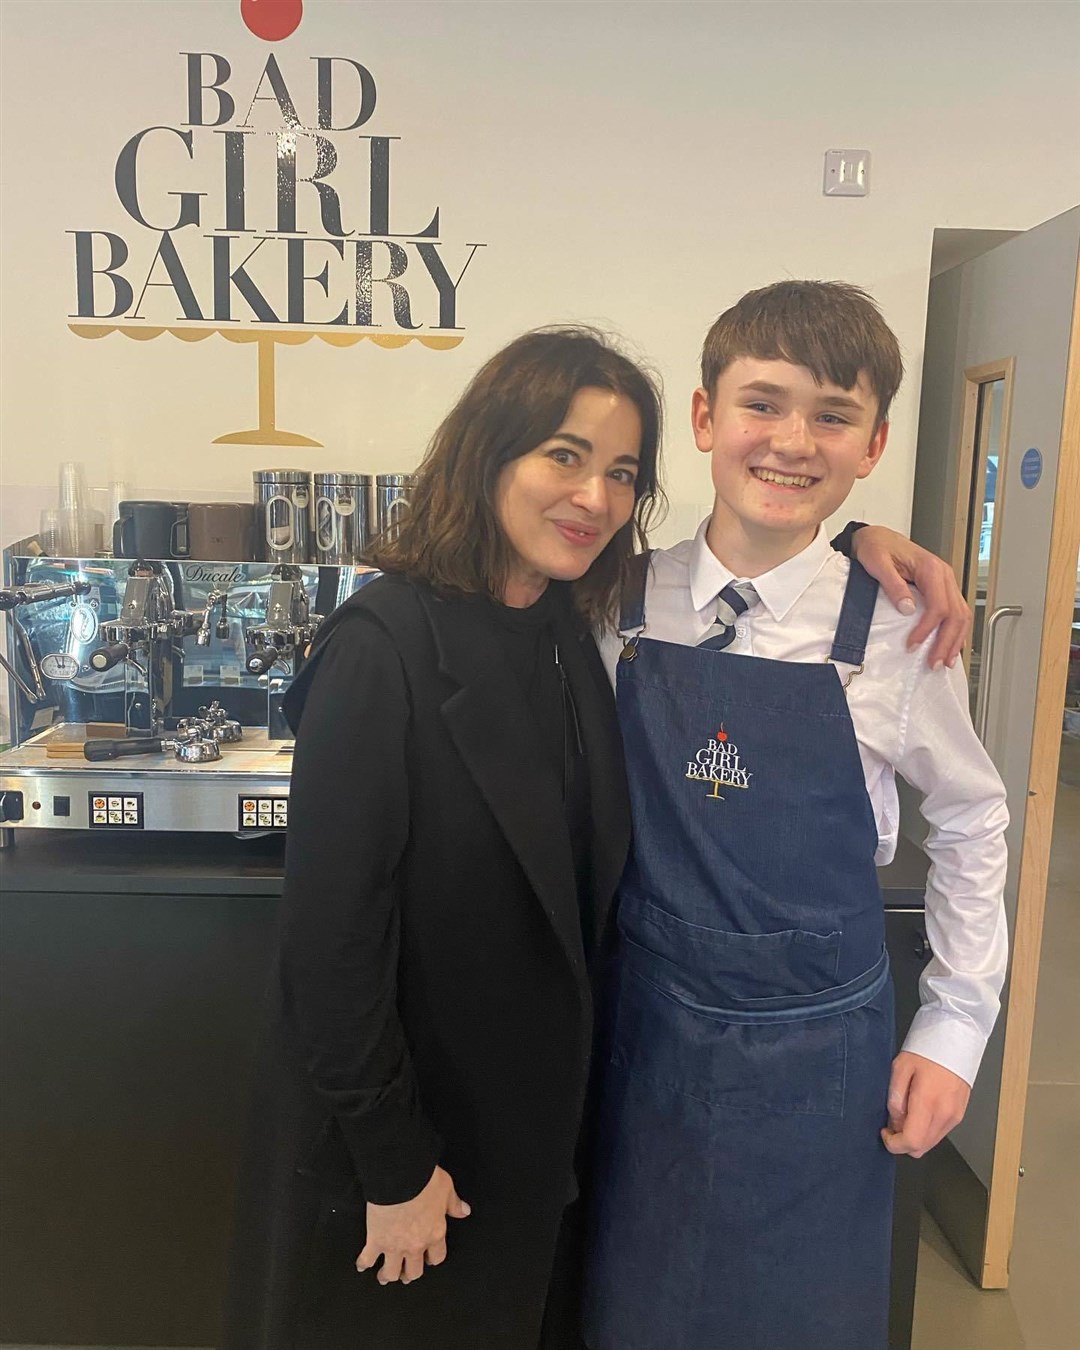 Nigella Lawson at Bad Girl Bakery in the Victorian Market.